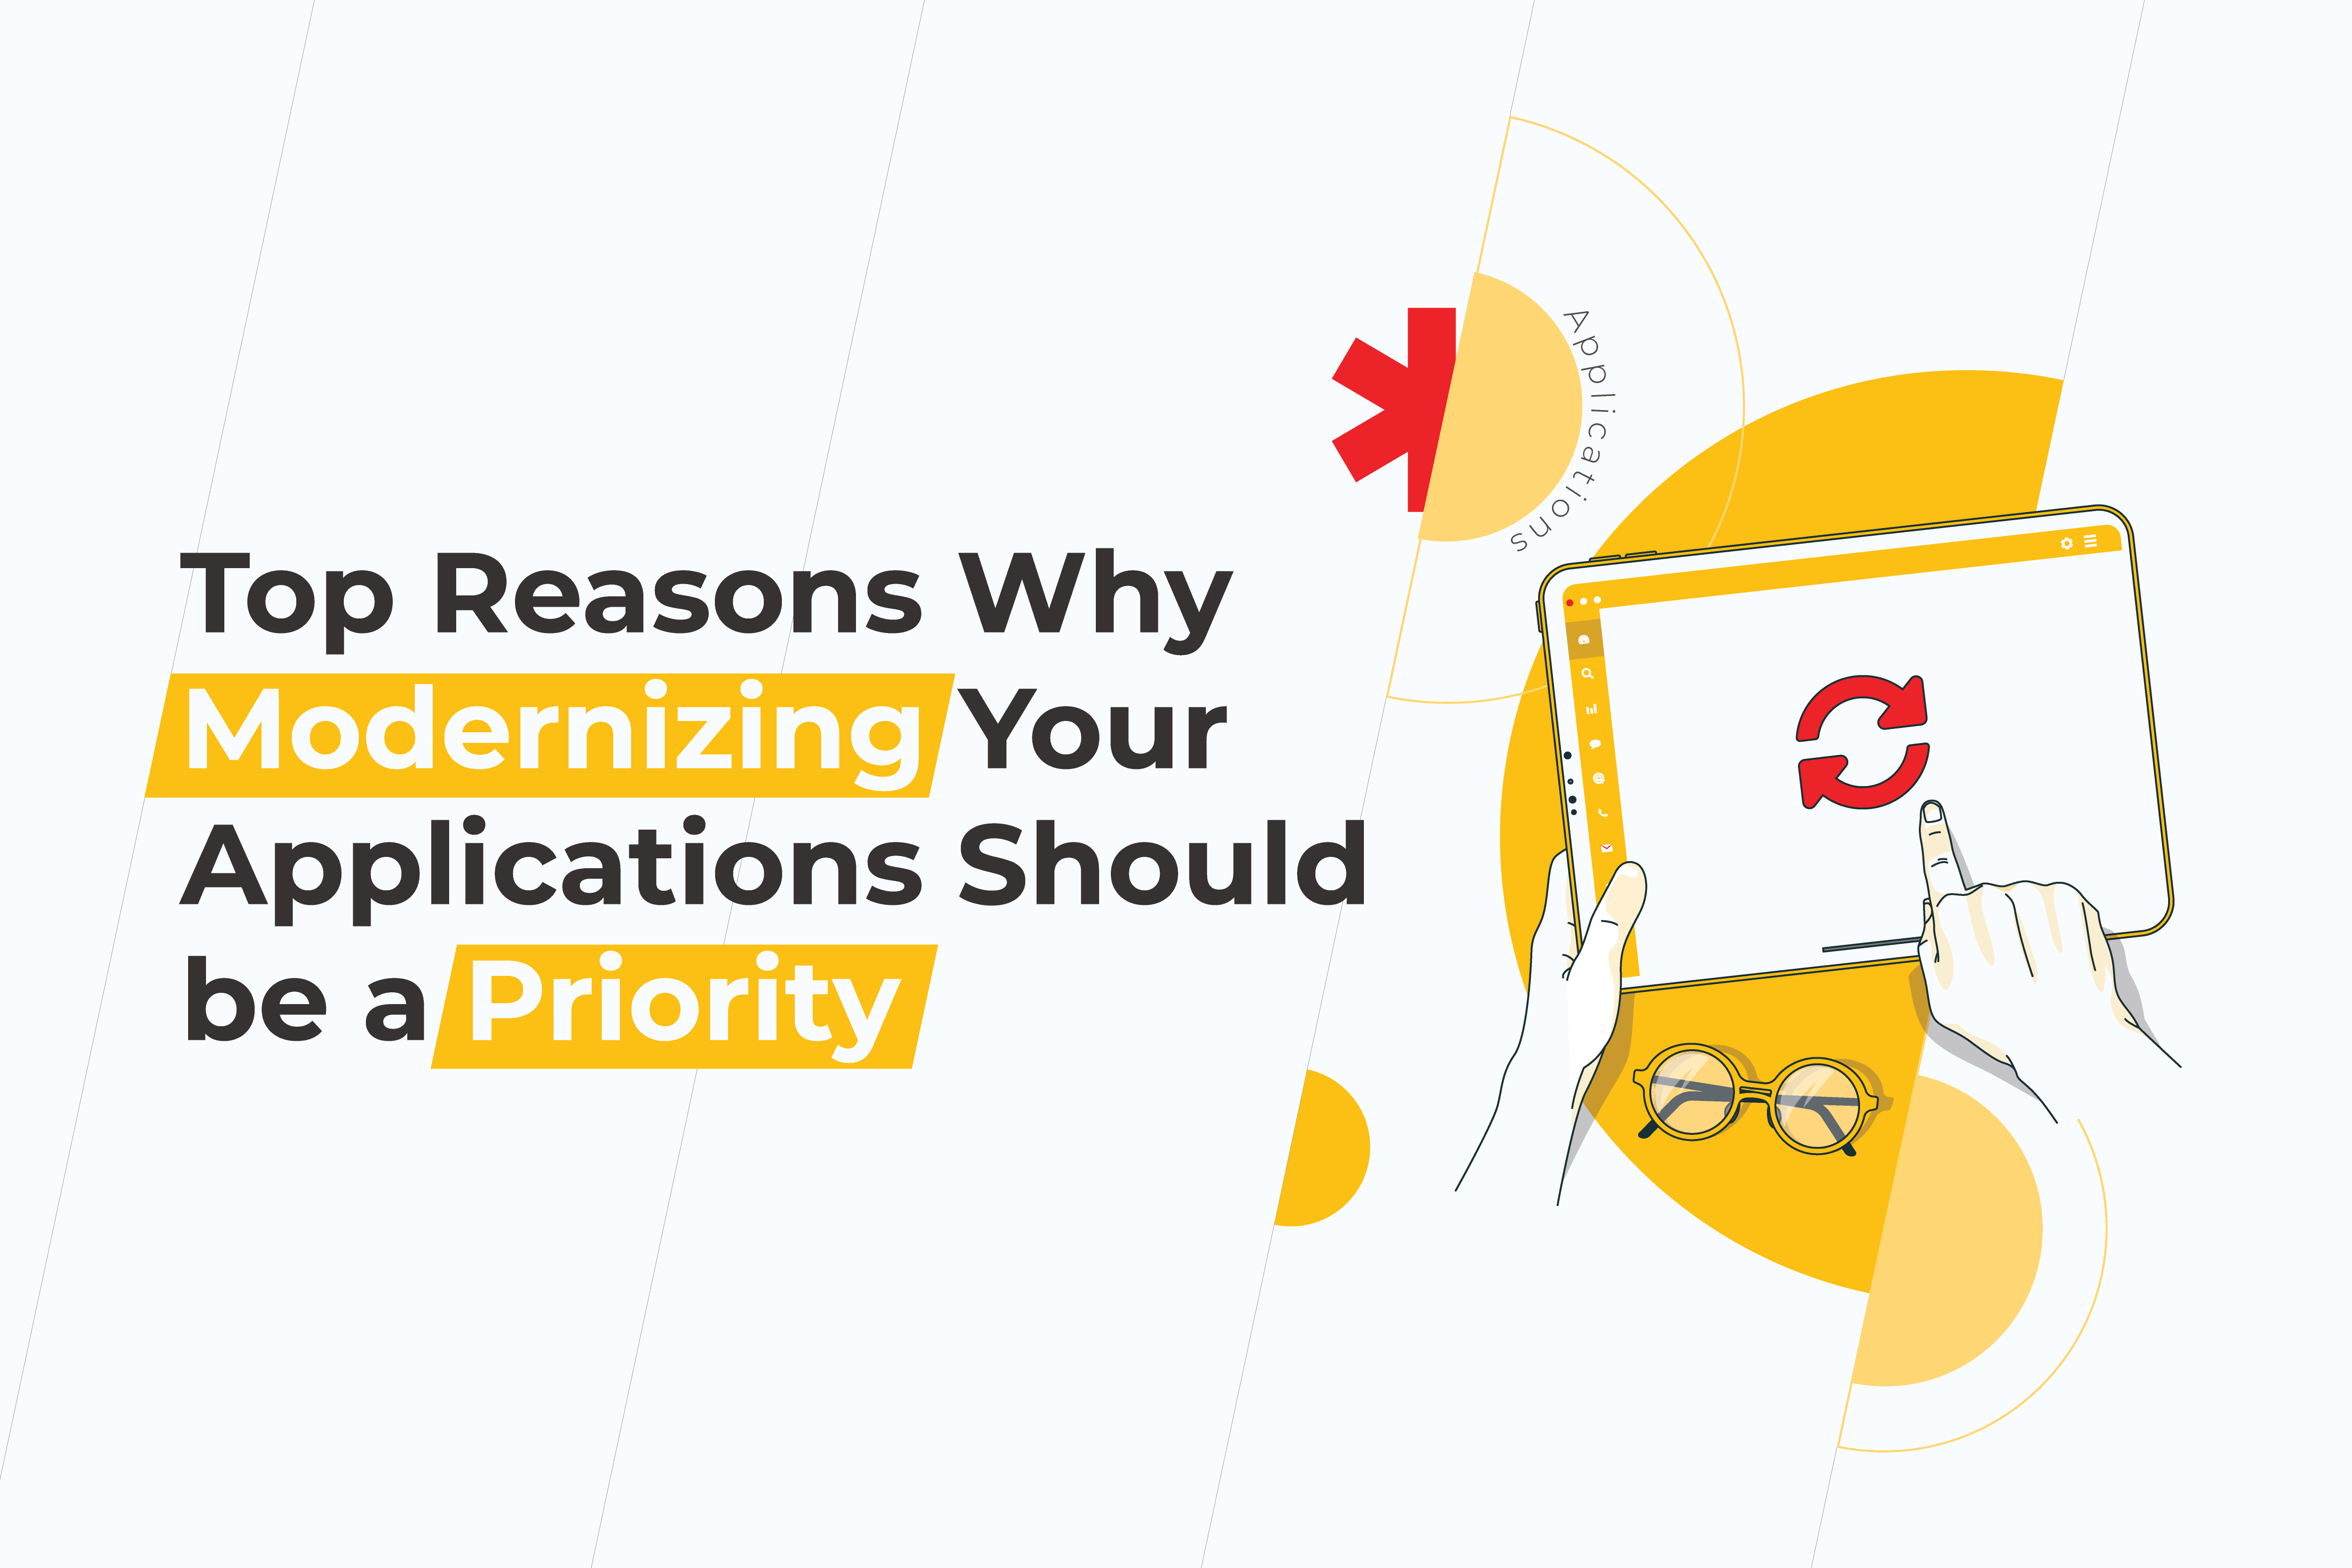 Top 8 reasons why modernizing your applications should be a priority